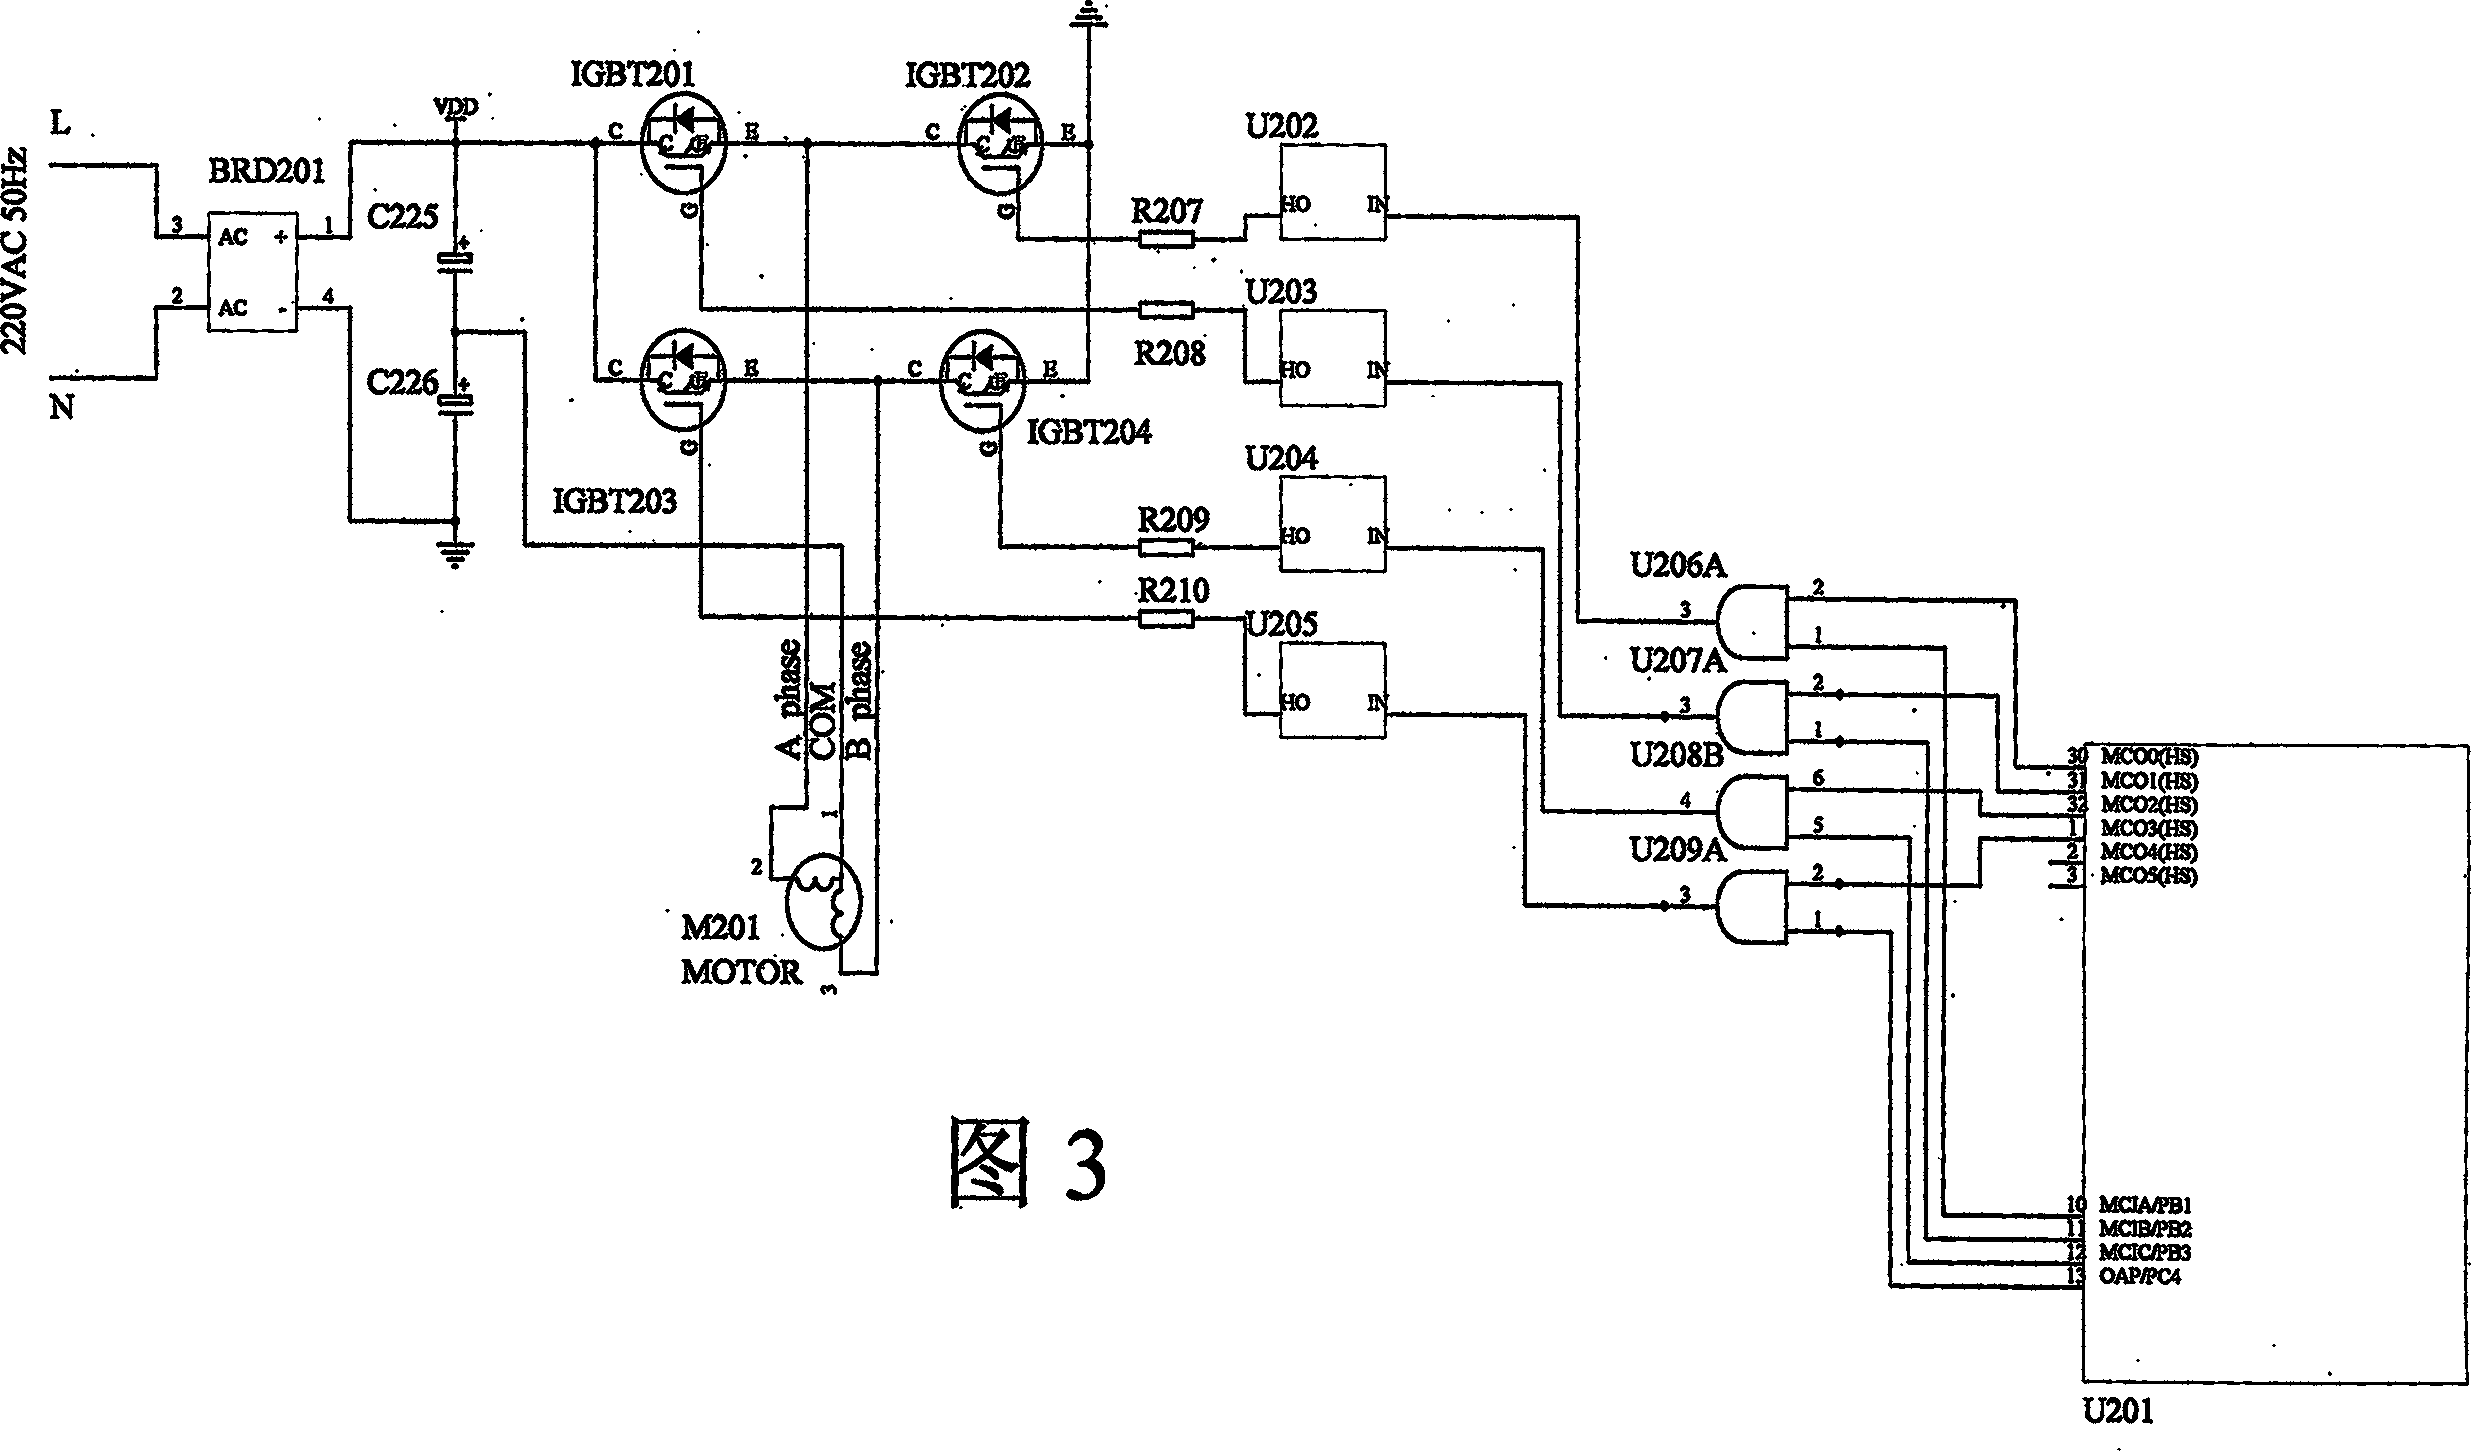 Frequency conversion drive system of pulse width modulation in AC motor